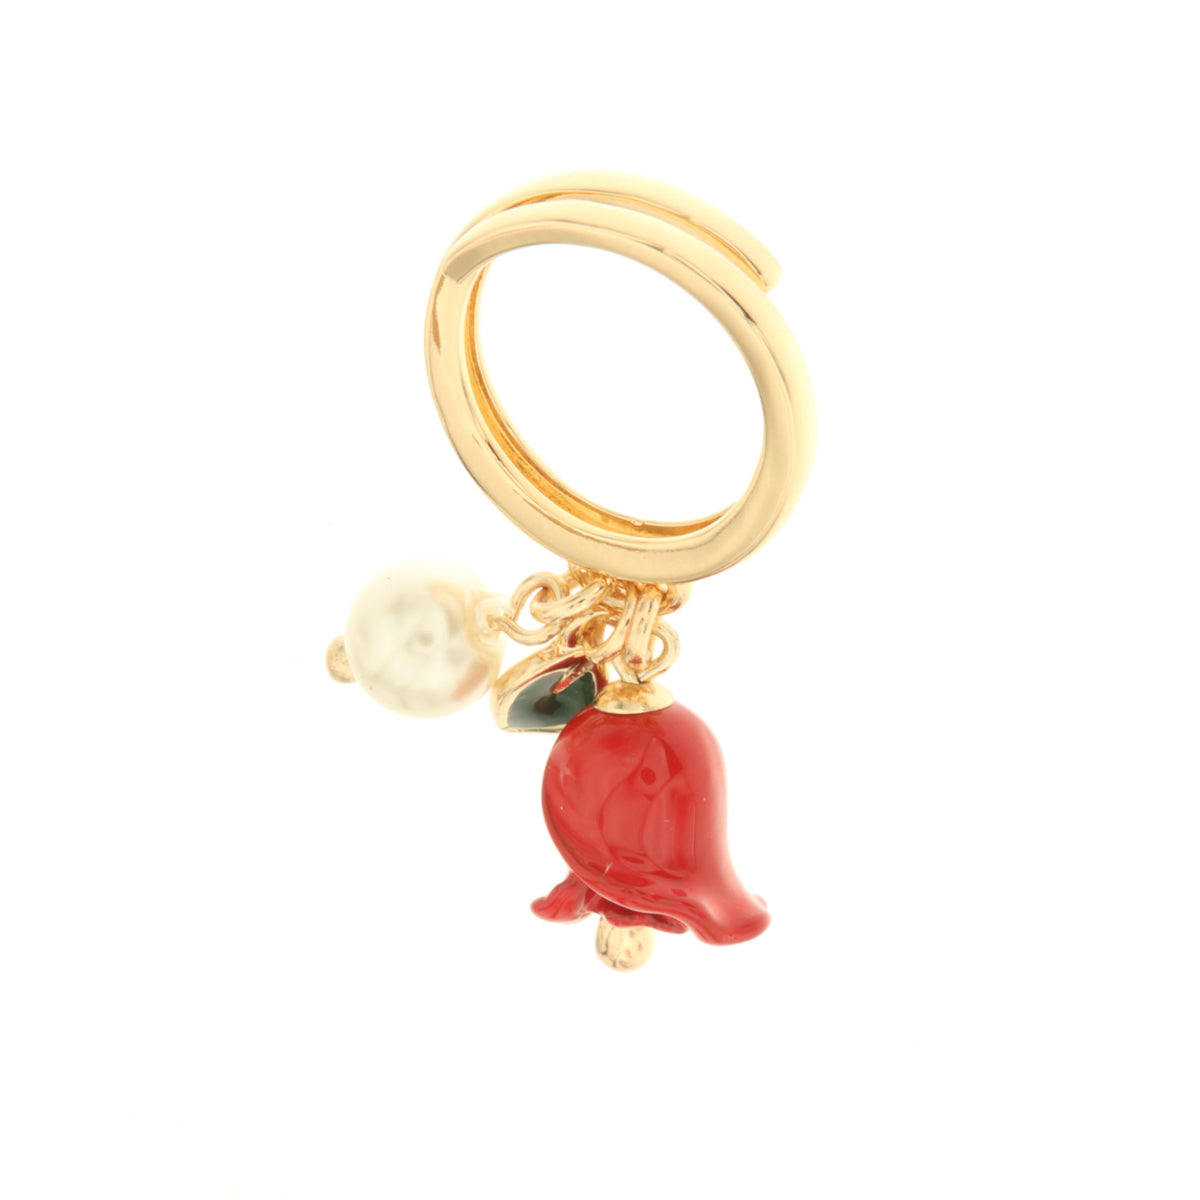 Metal ring with pearl and rose -shaped bell embellished with colored glazes